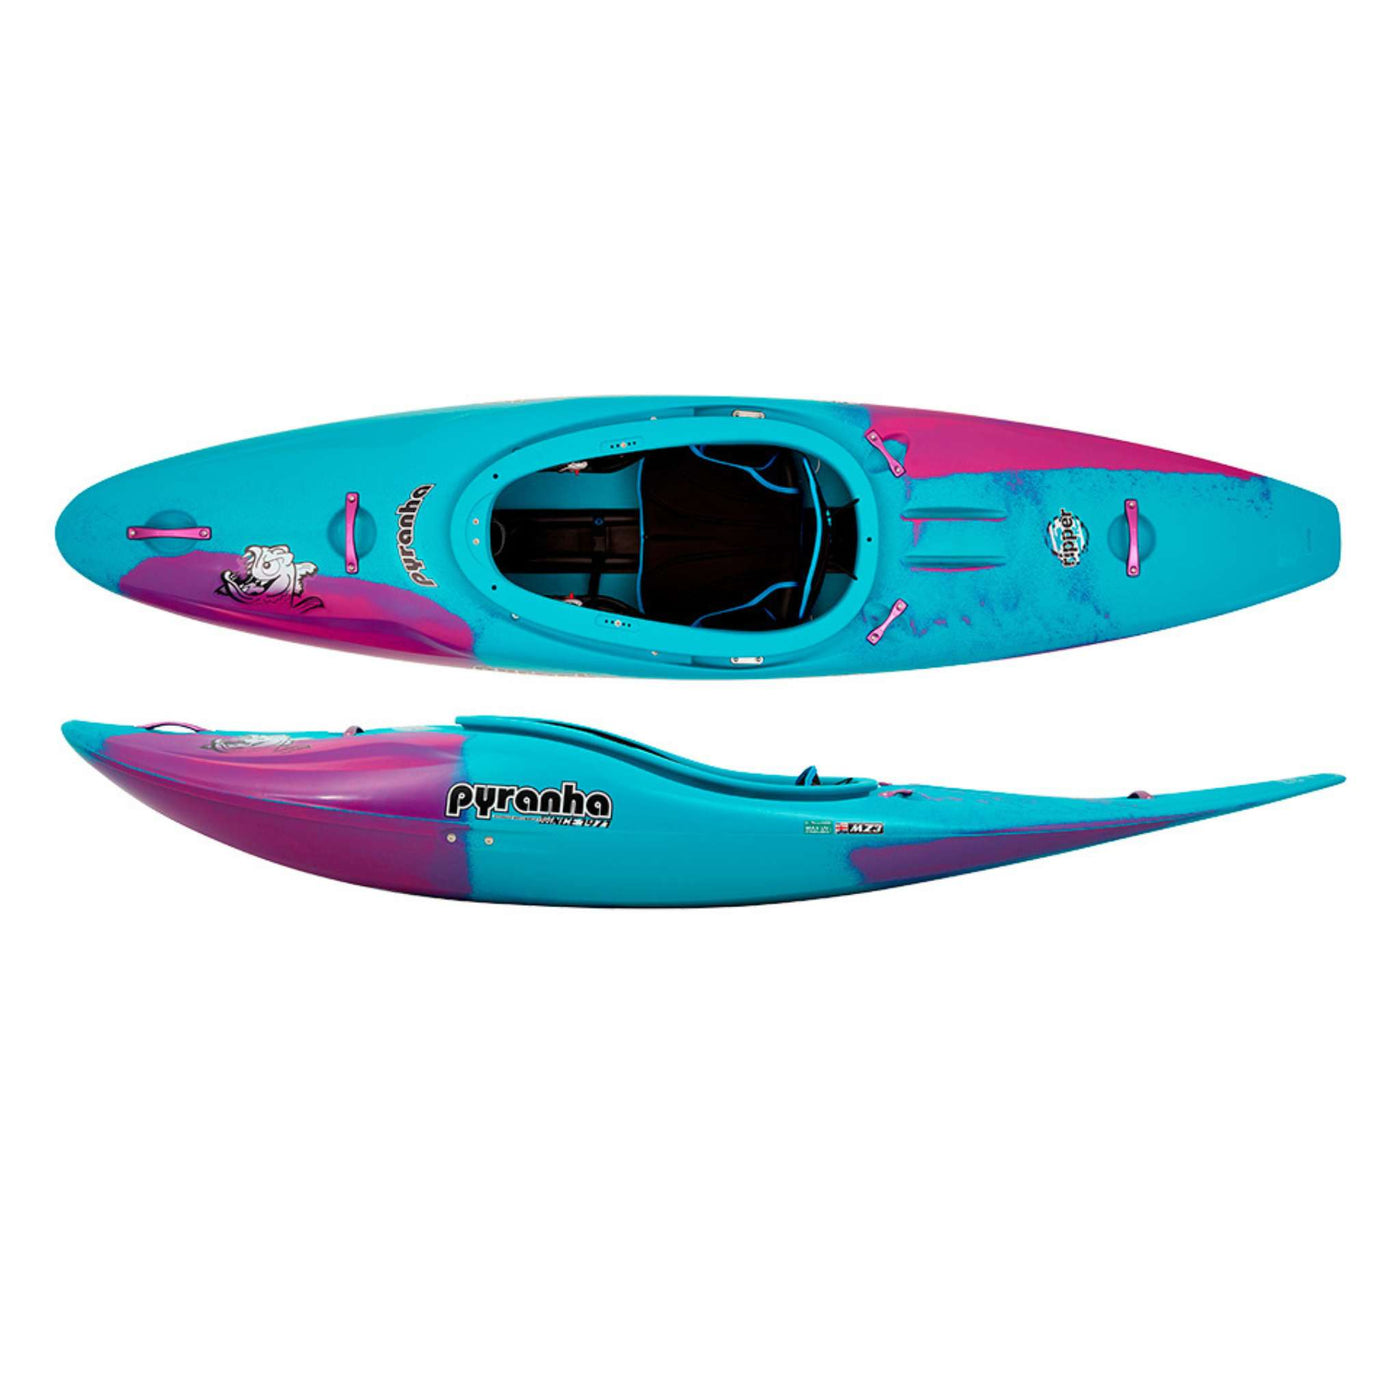 Pyranha-R Evo 2 F | Whitewater Kayak | Further Faster Christchurch NZ #cotinga-blue reference color only